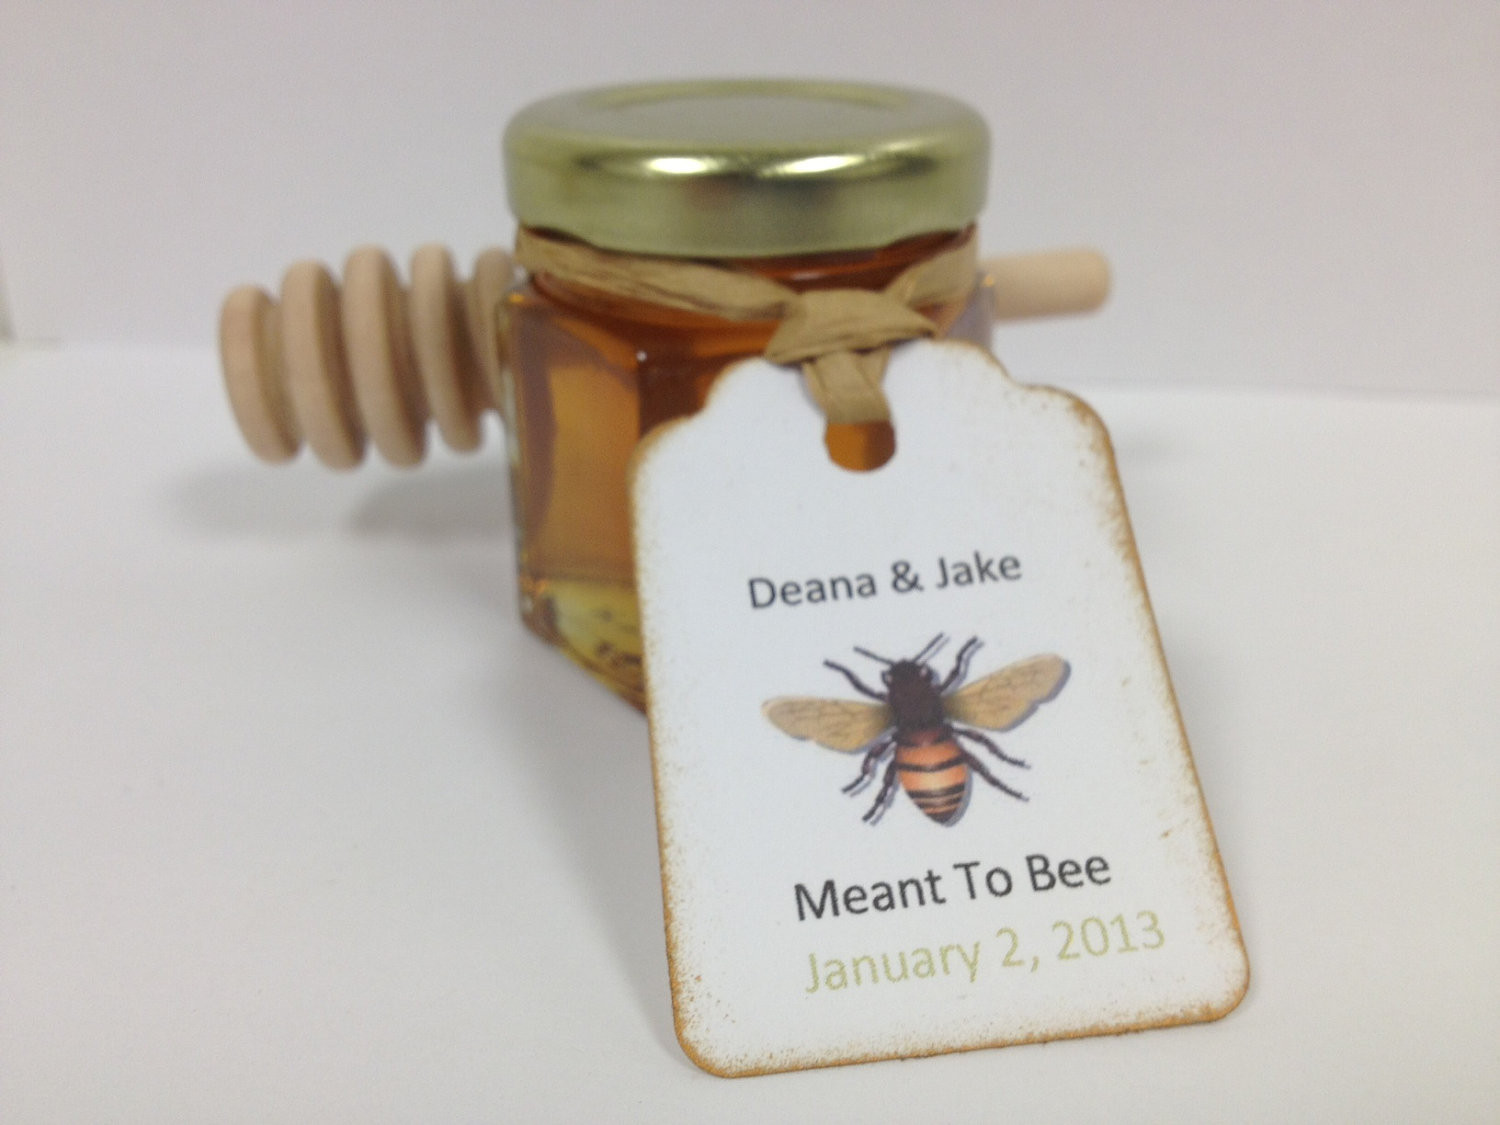 Honey Wedding Favors
 70qty Meant To Bee Honey Wedding Shower Favors With Dipper